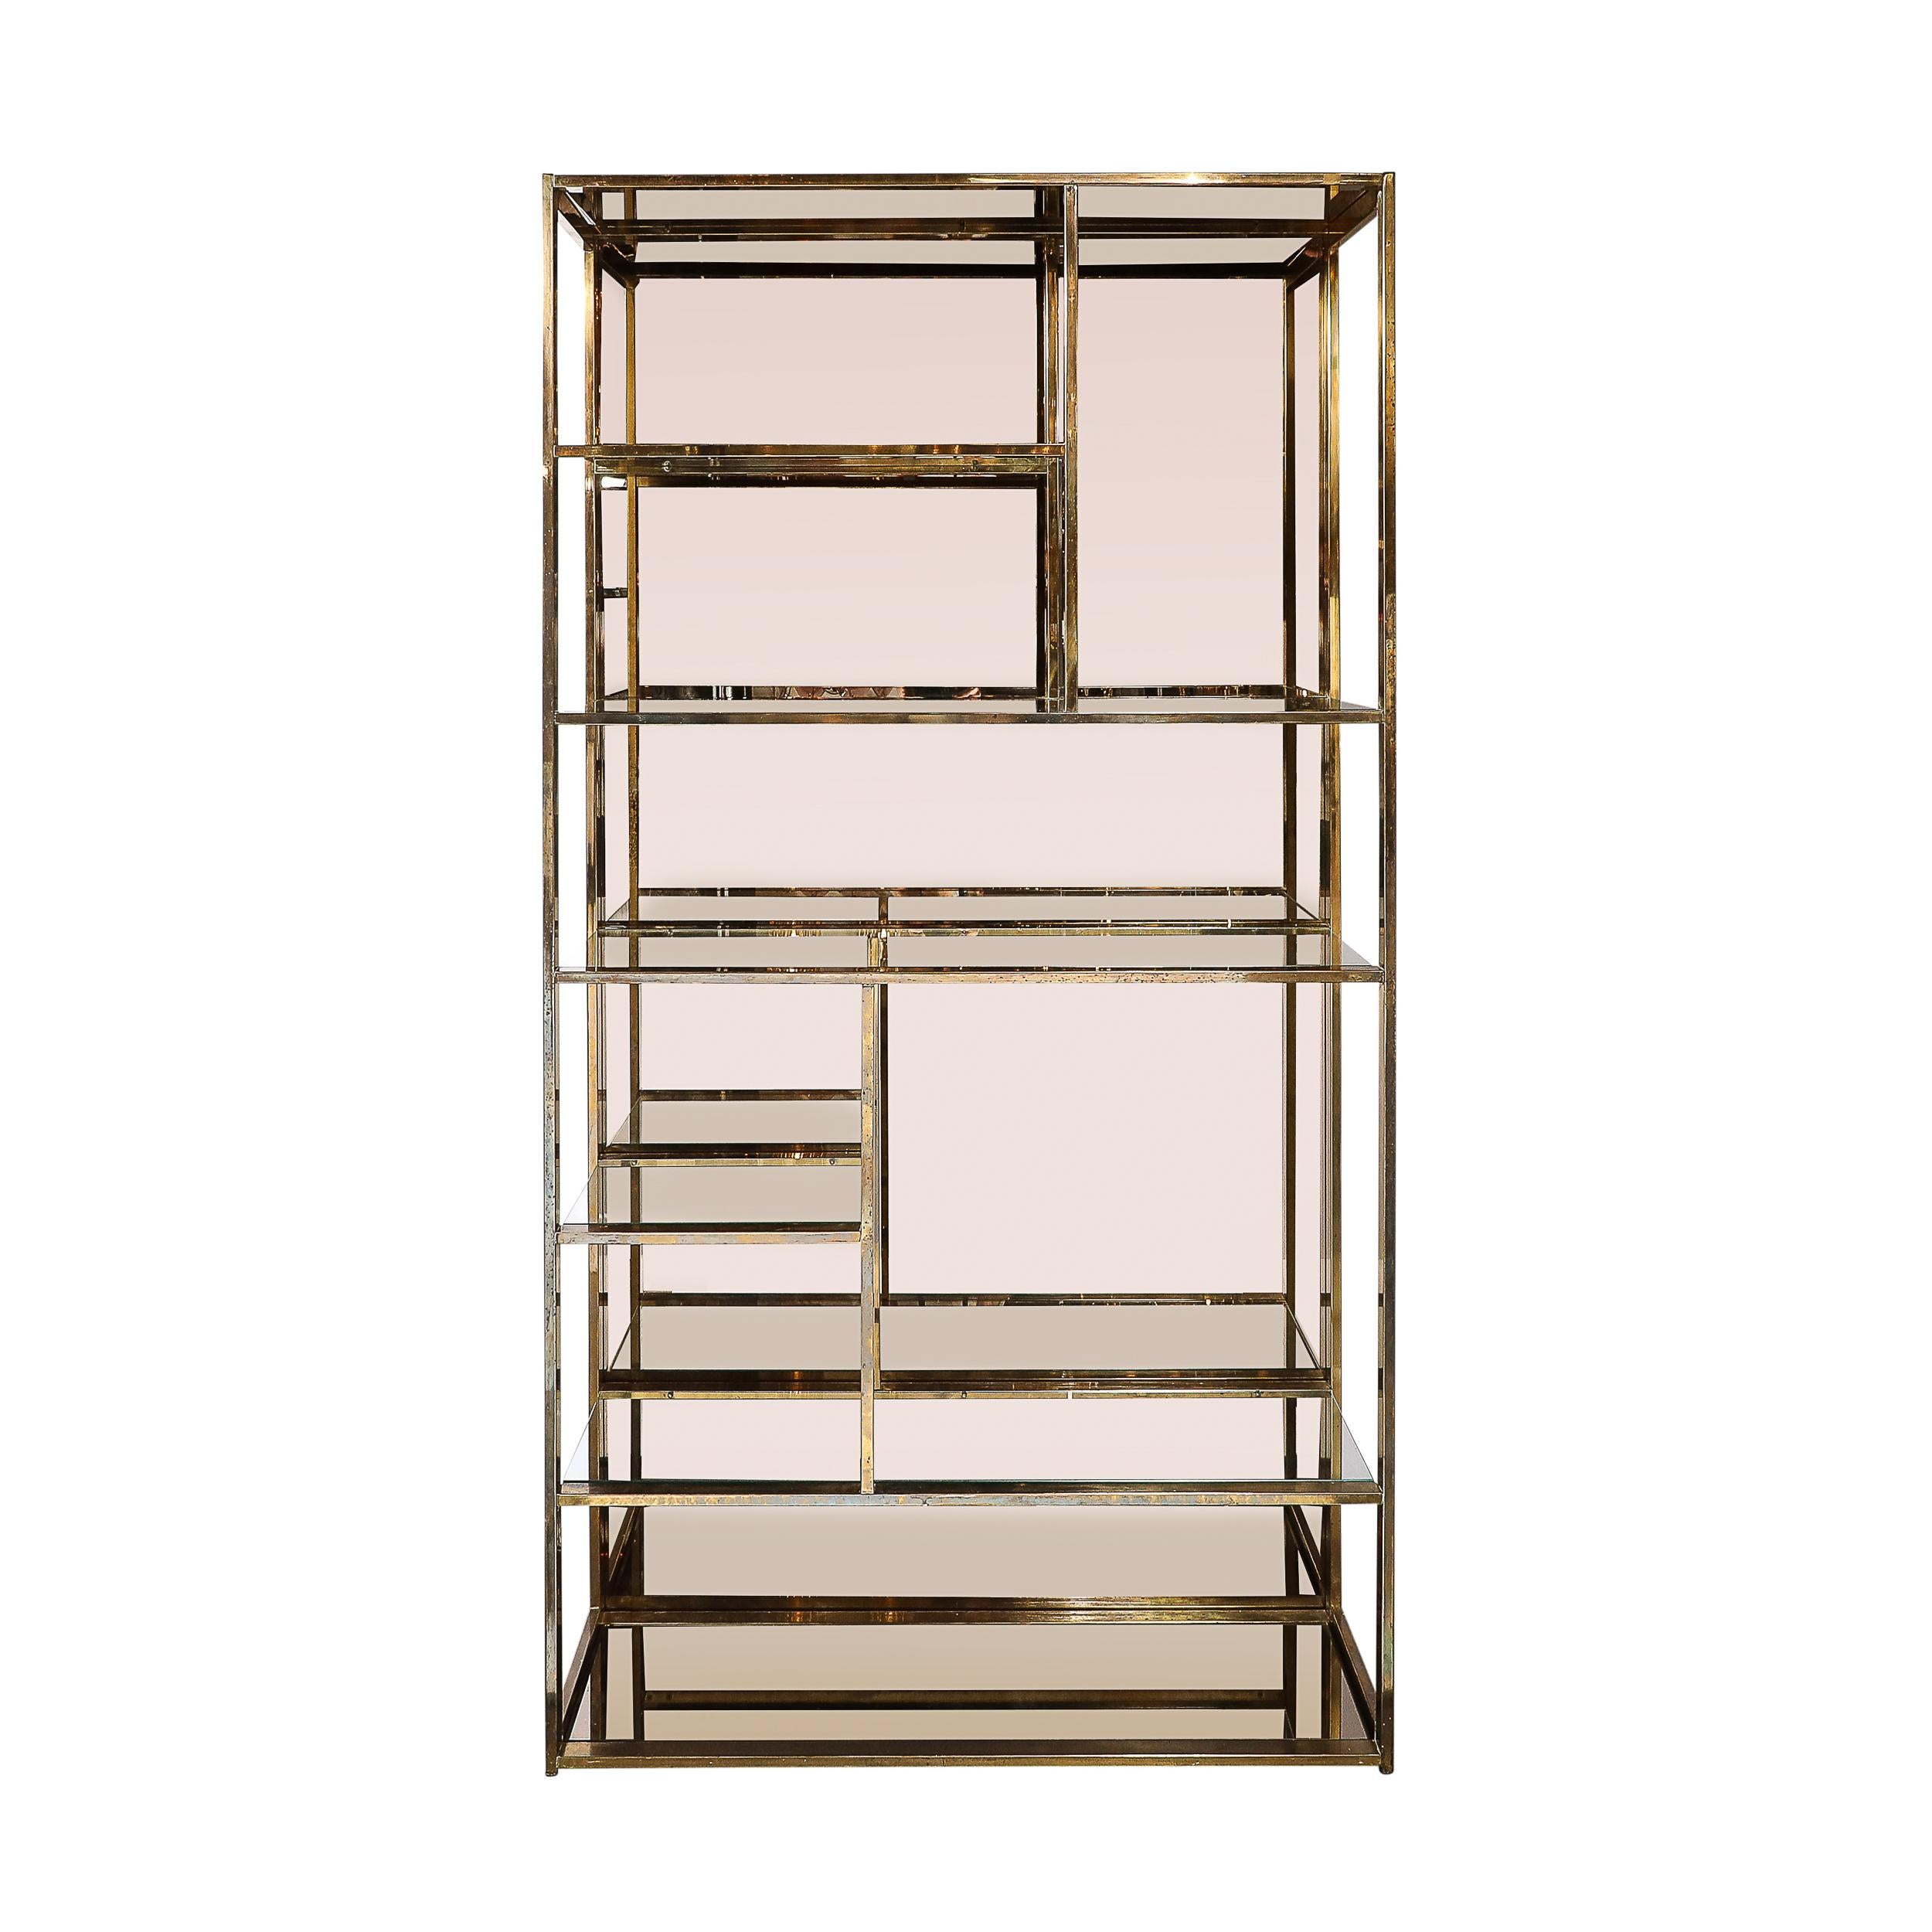 This sleek and well composed Mid-Century Modernist Étagère in Brass, Glass and Bronzed Mirror by Milo Baughman originates from the United States, Circa 1970. Features a patinated brass framework in rectangular elements that are joined at unique